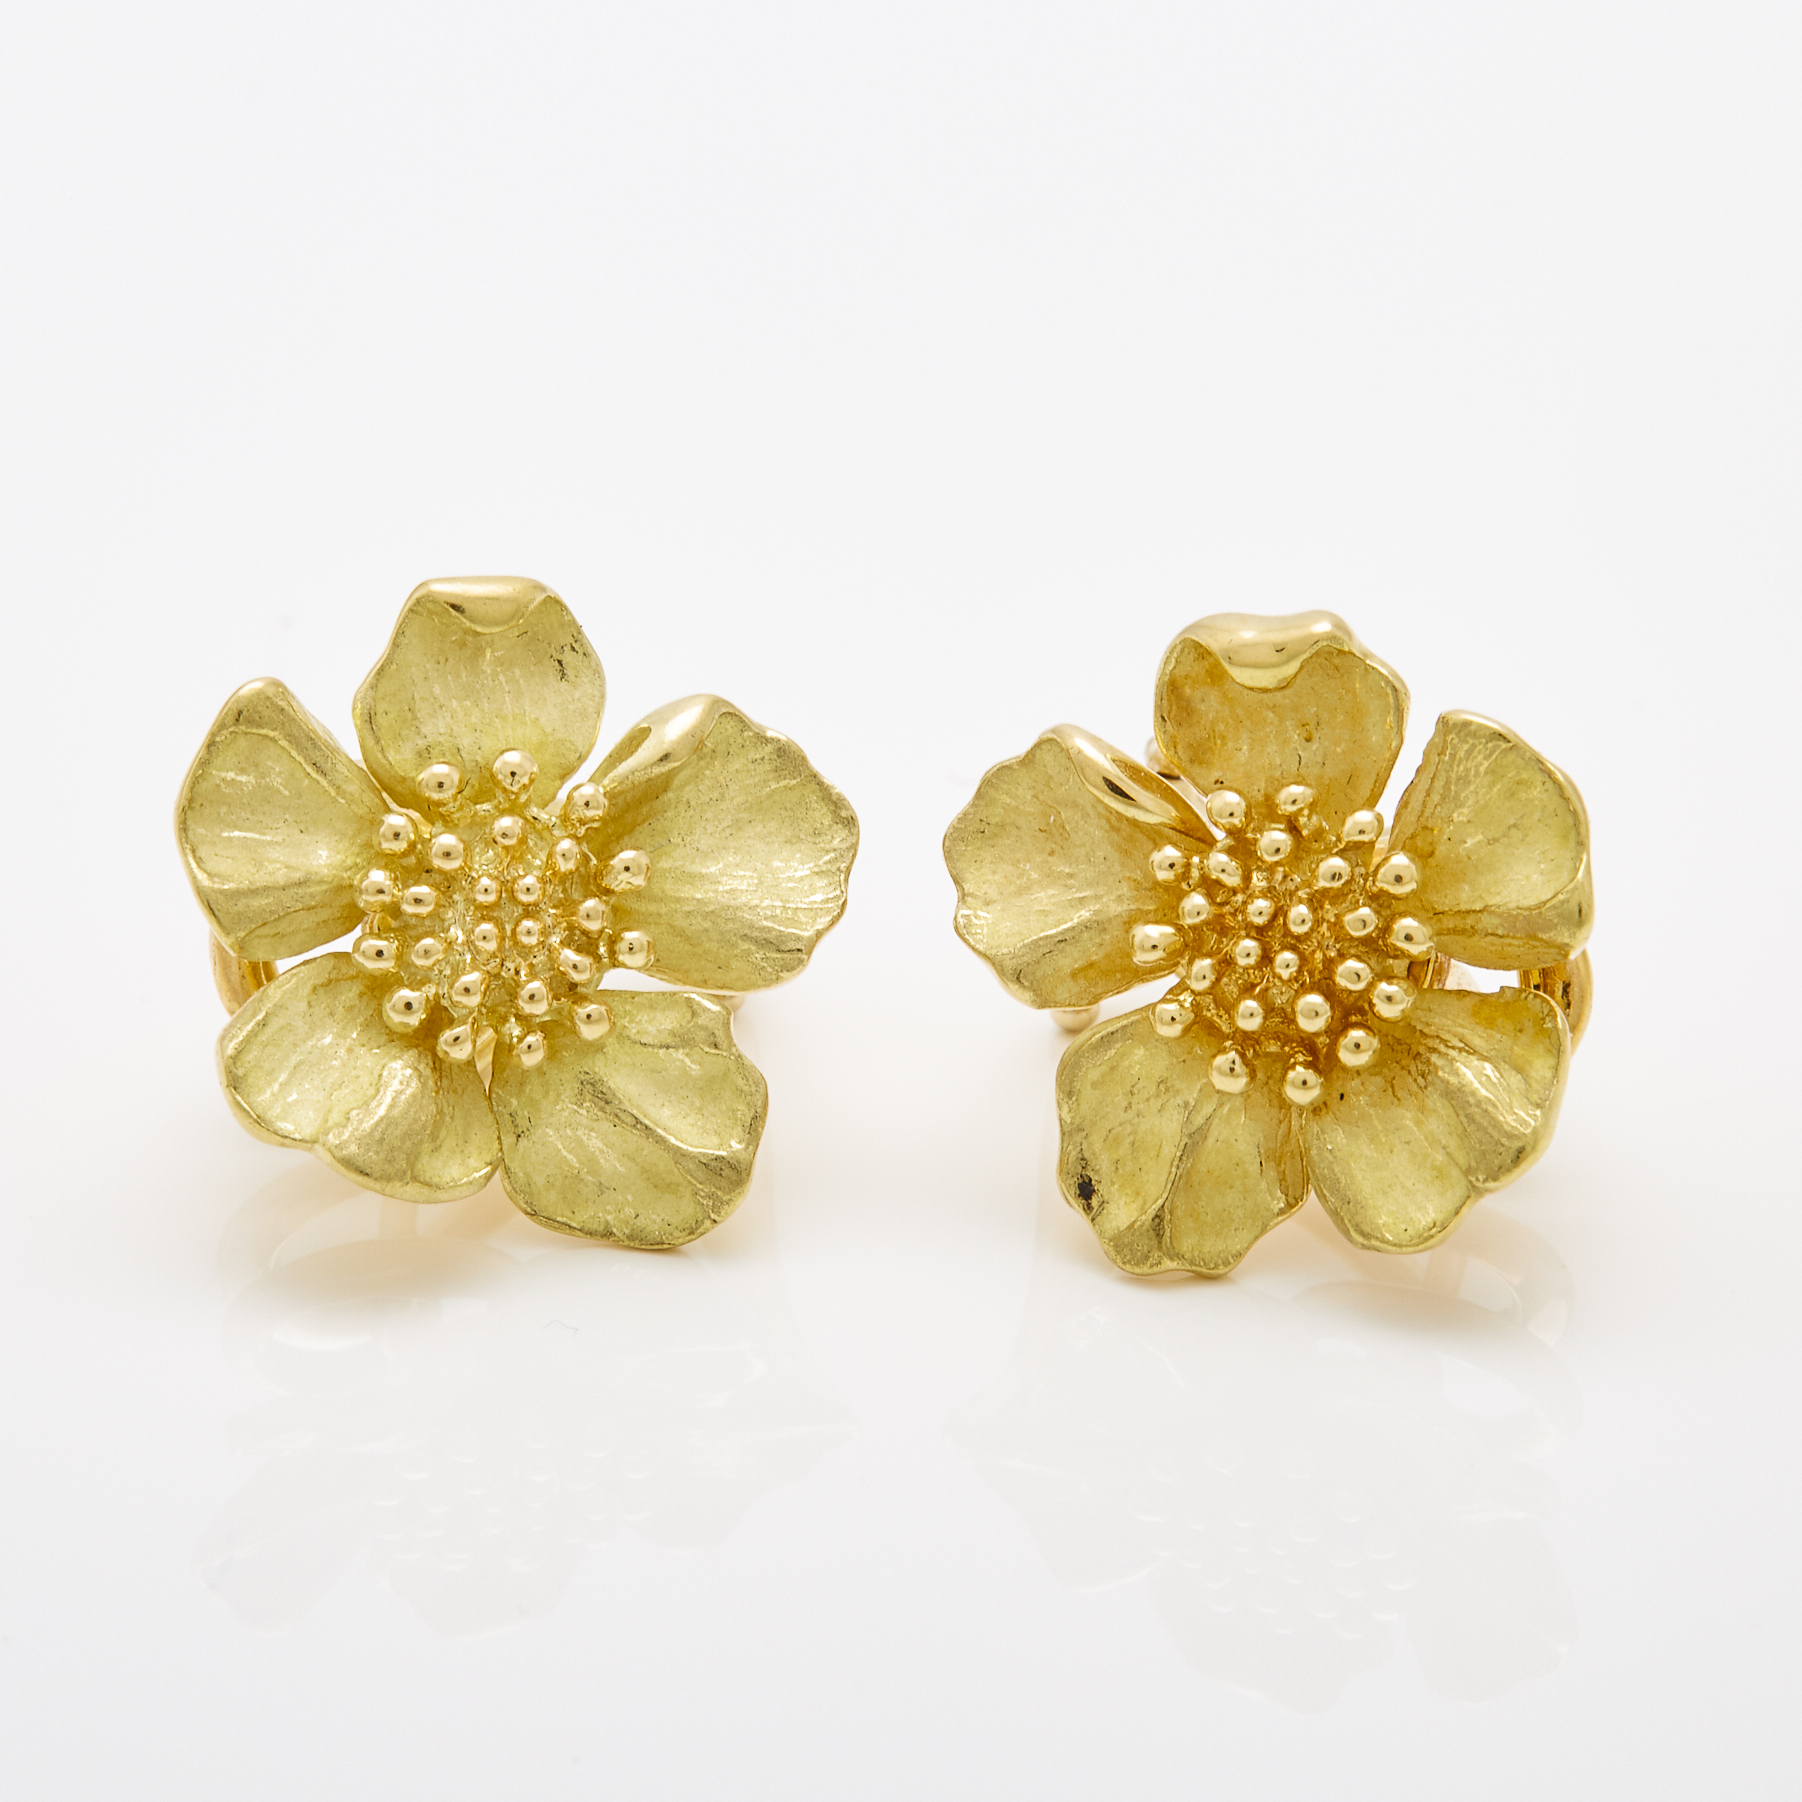 Pair of Tiffany & Co. 18k Yellow Gold Button Earrings